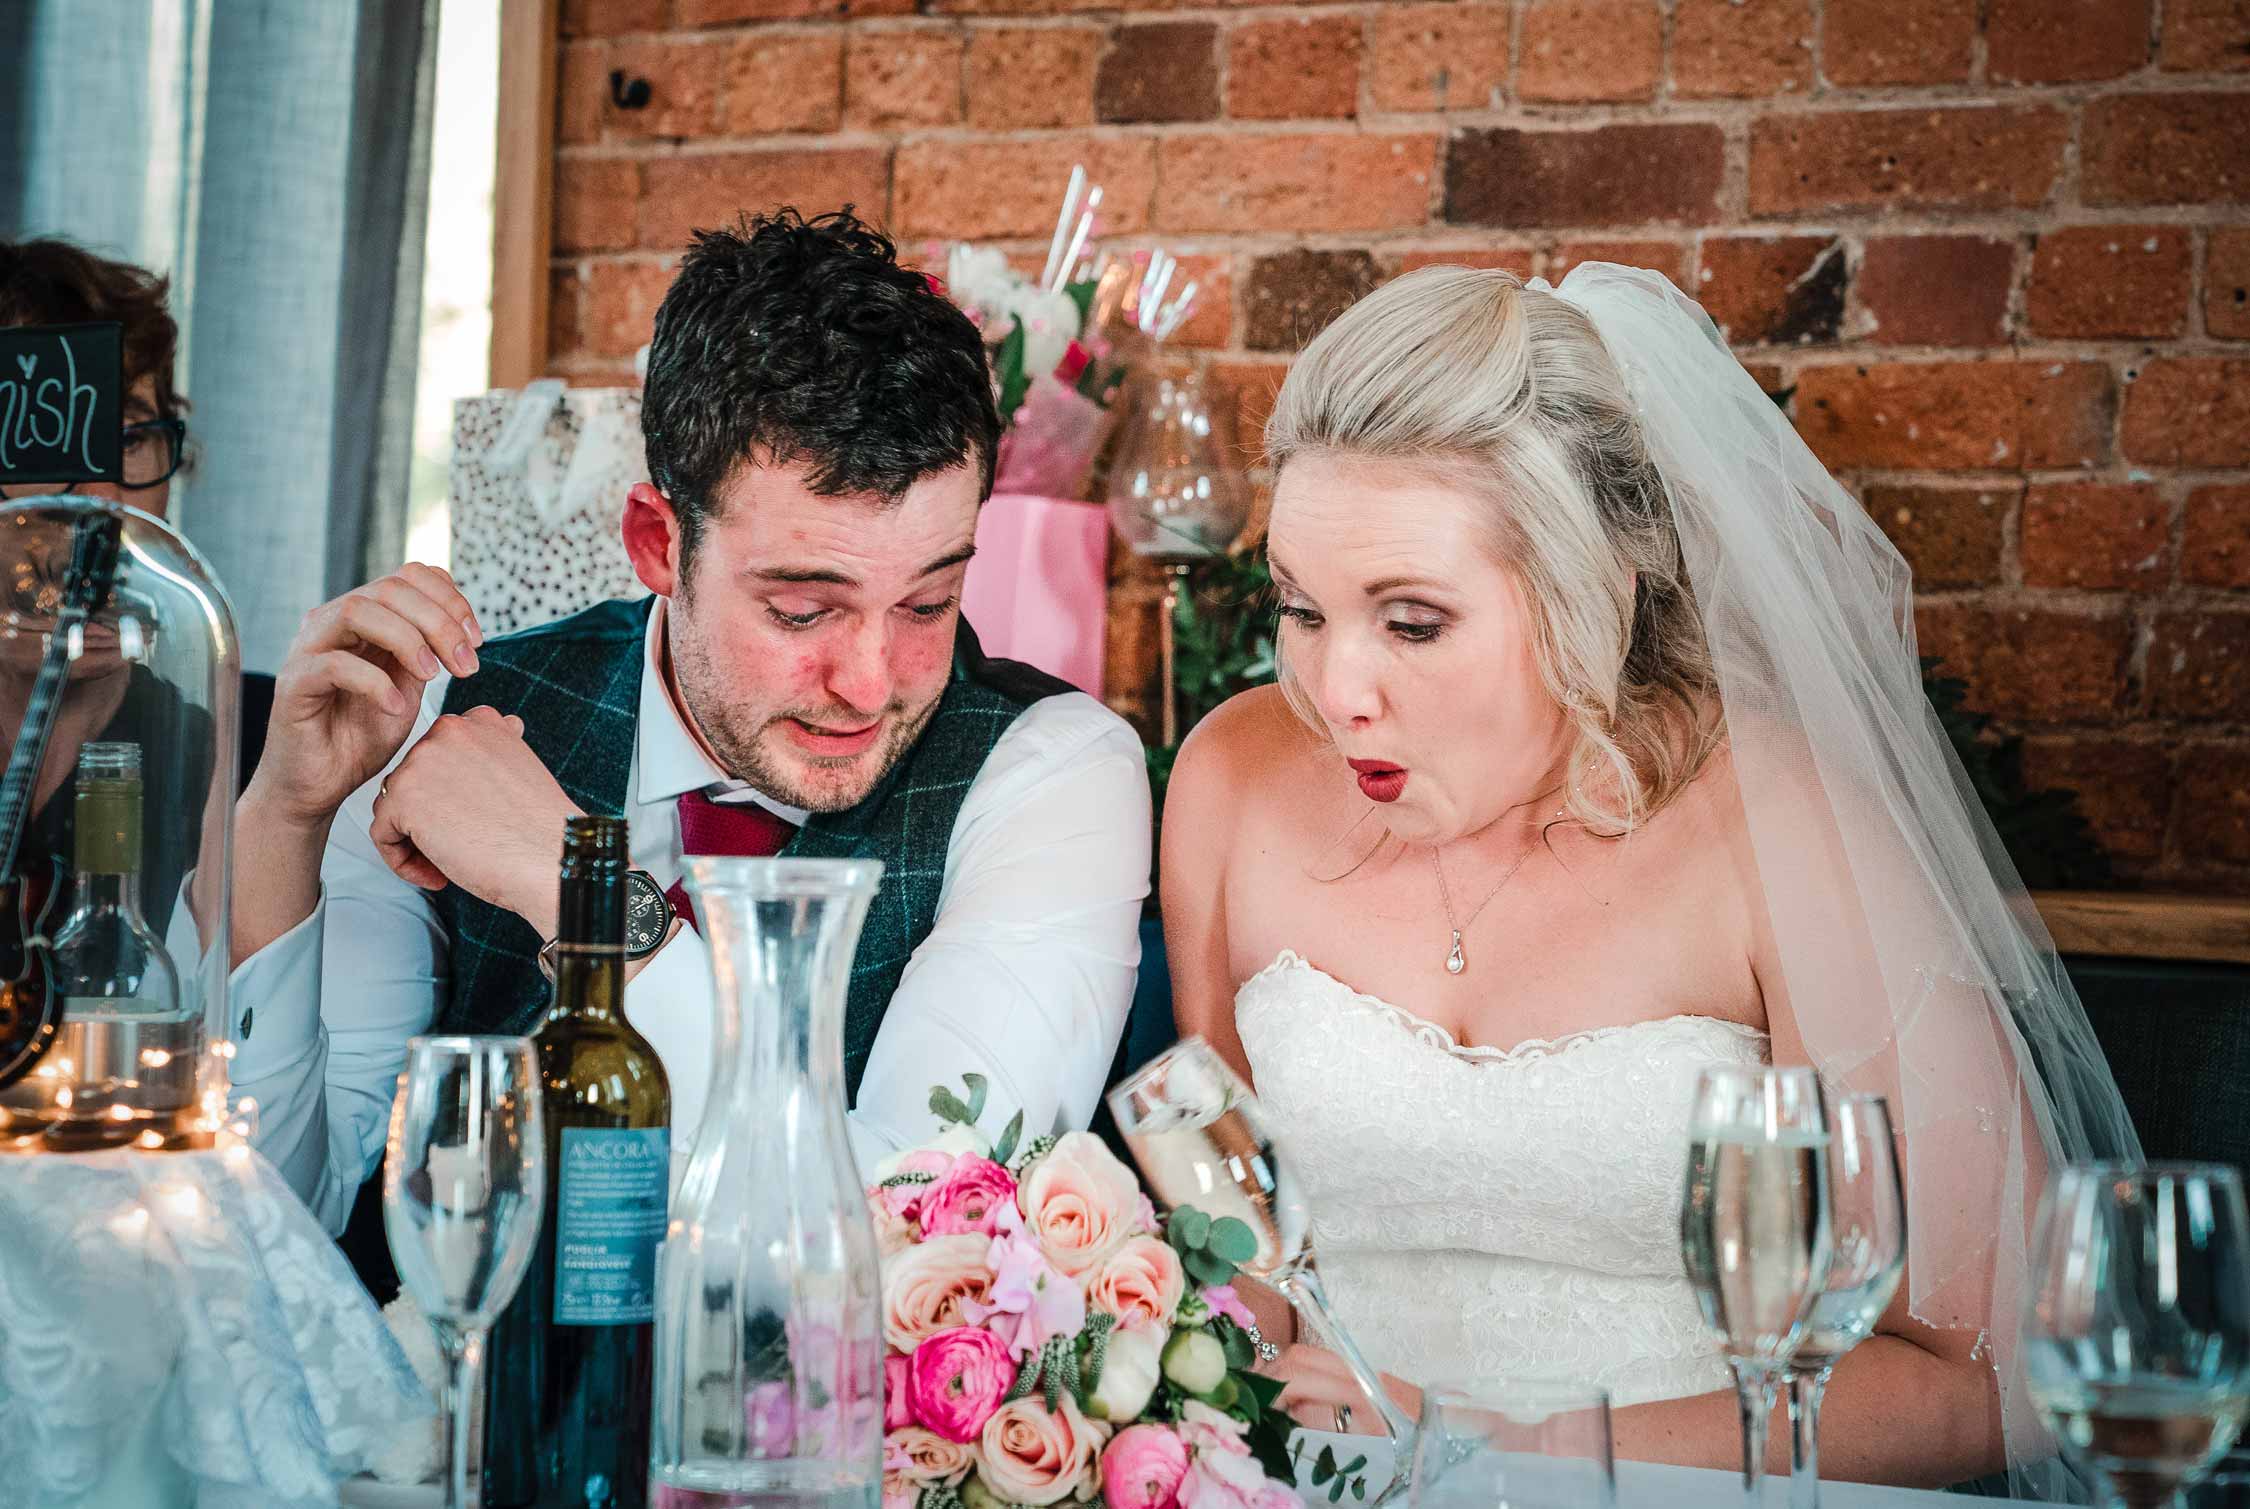 shocked look on bride & groom's face as she knocks over a glass of wine